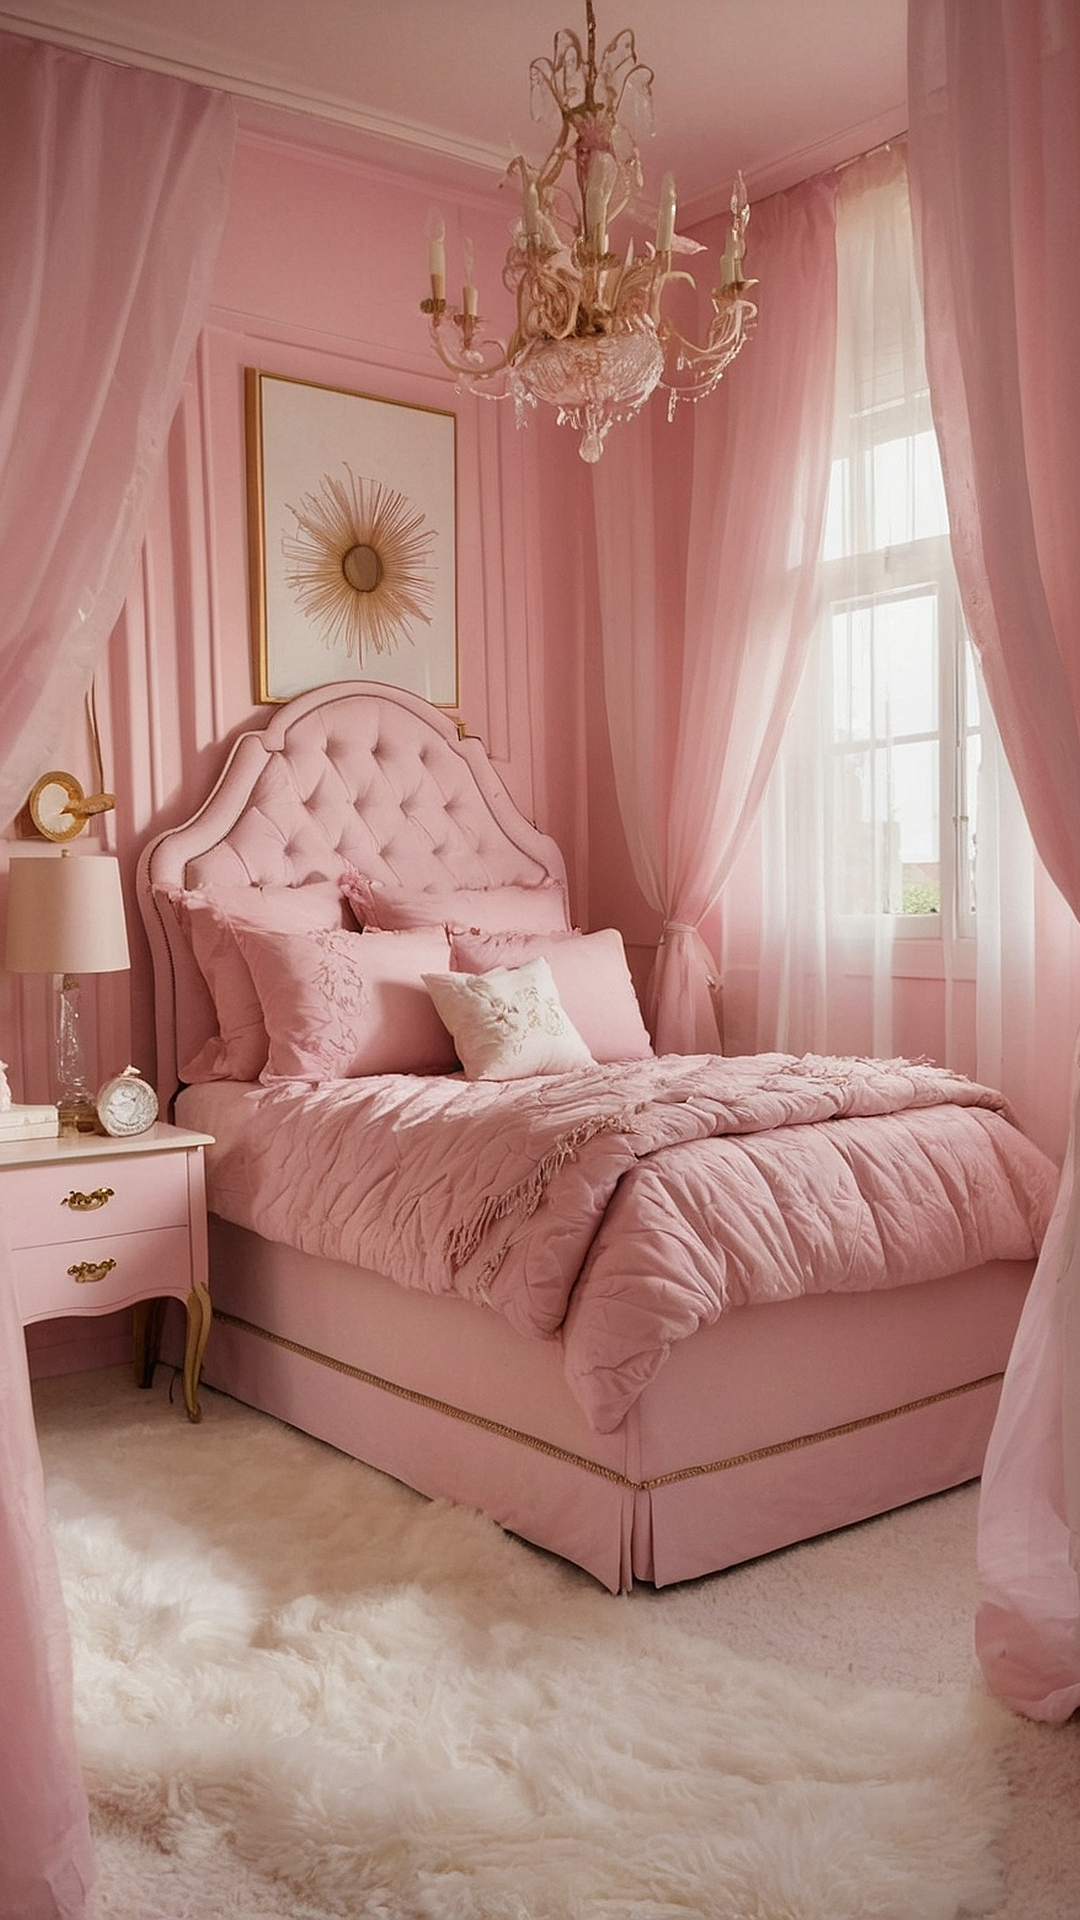 Peony Perfection: Dreamy Pink Bedroom Ideas